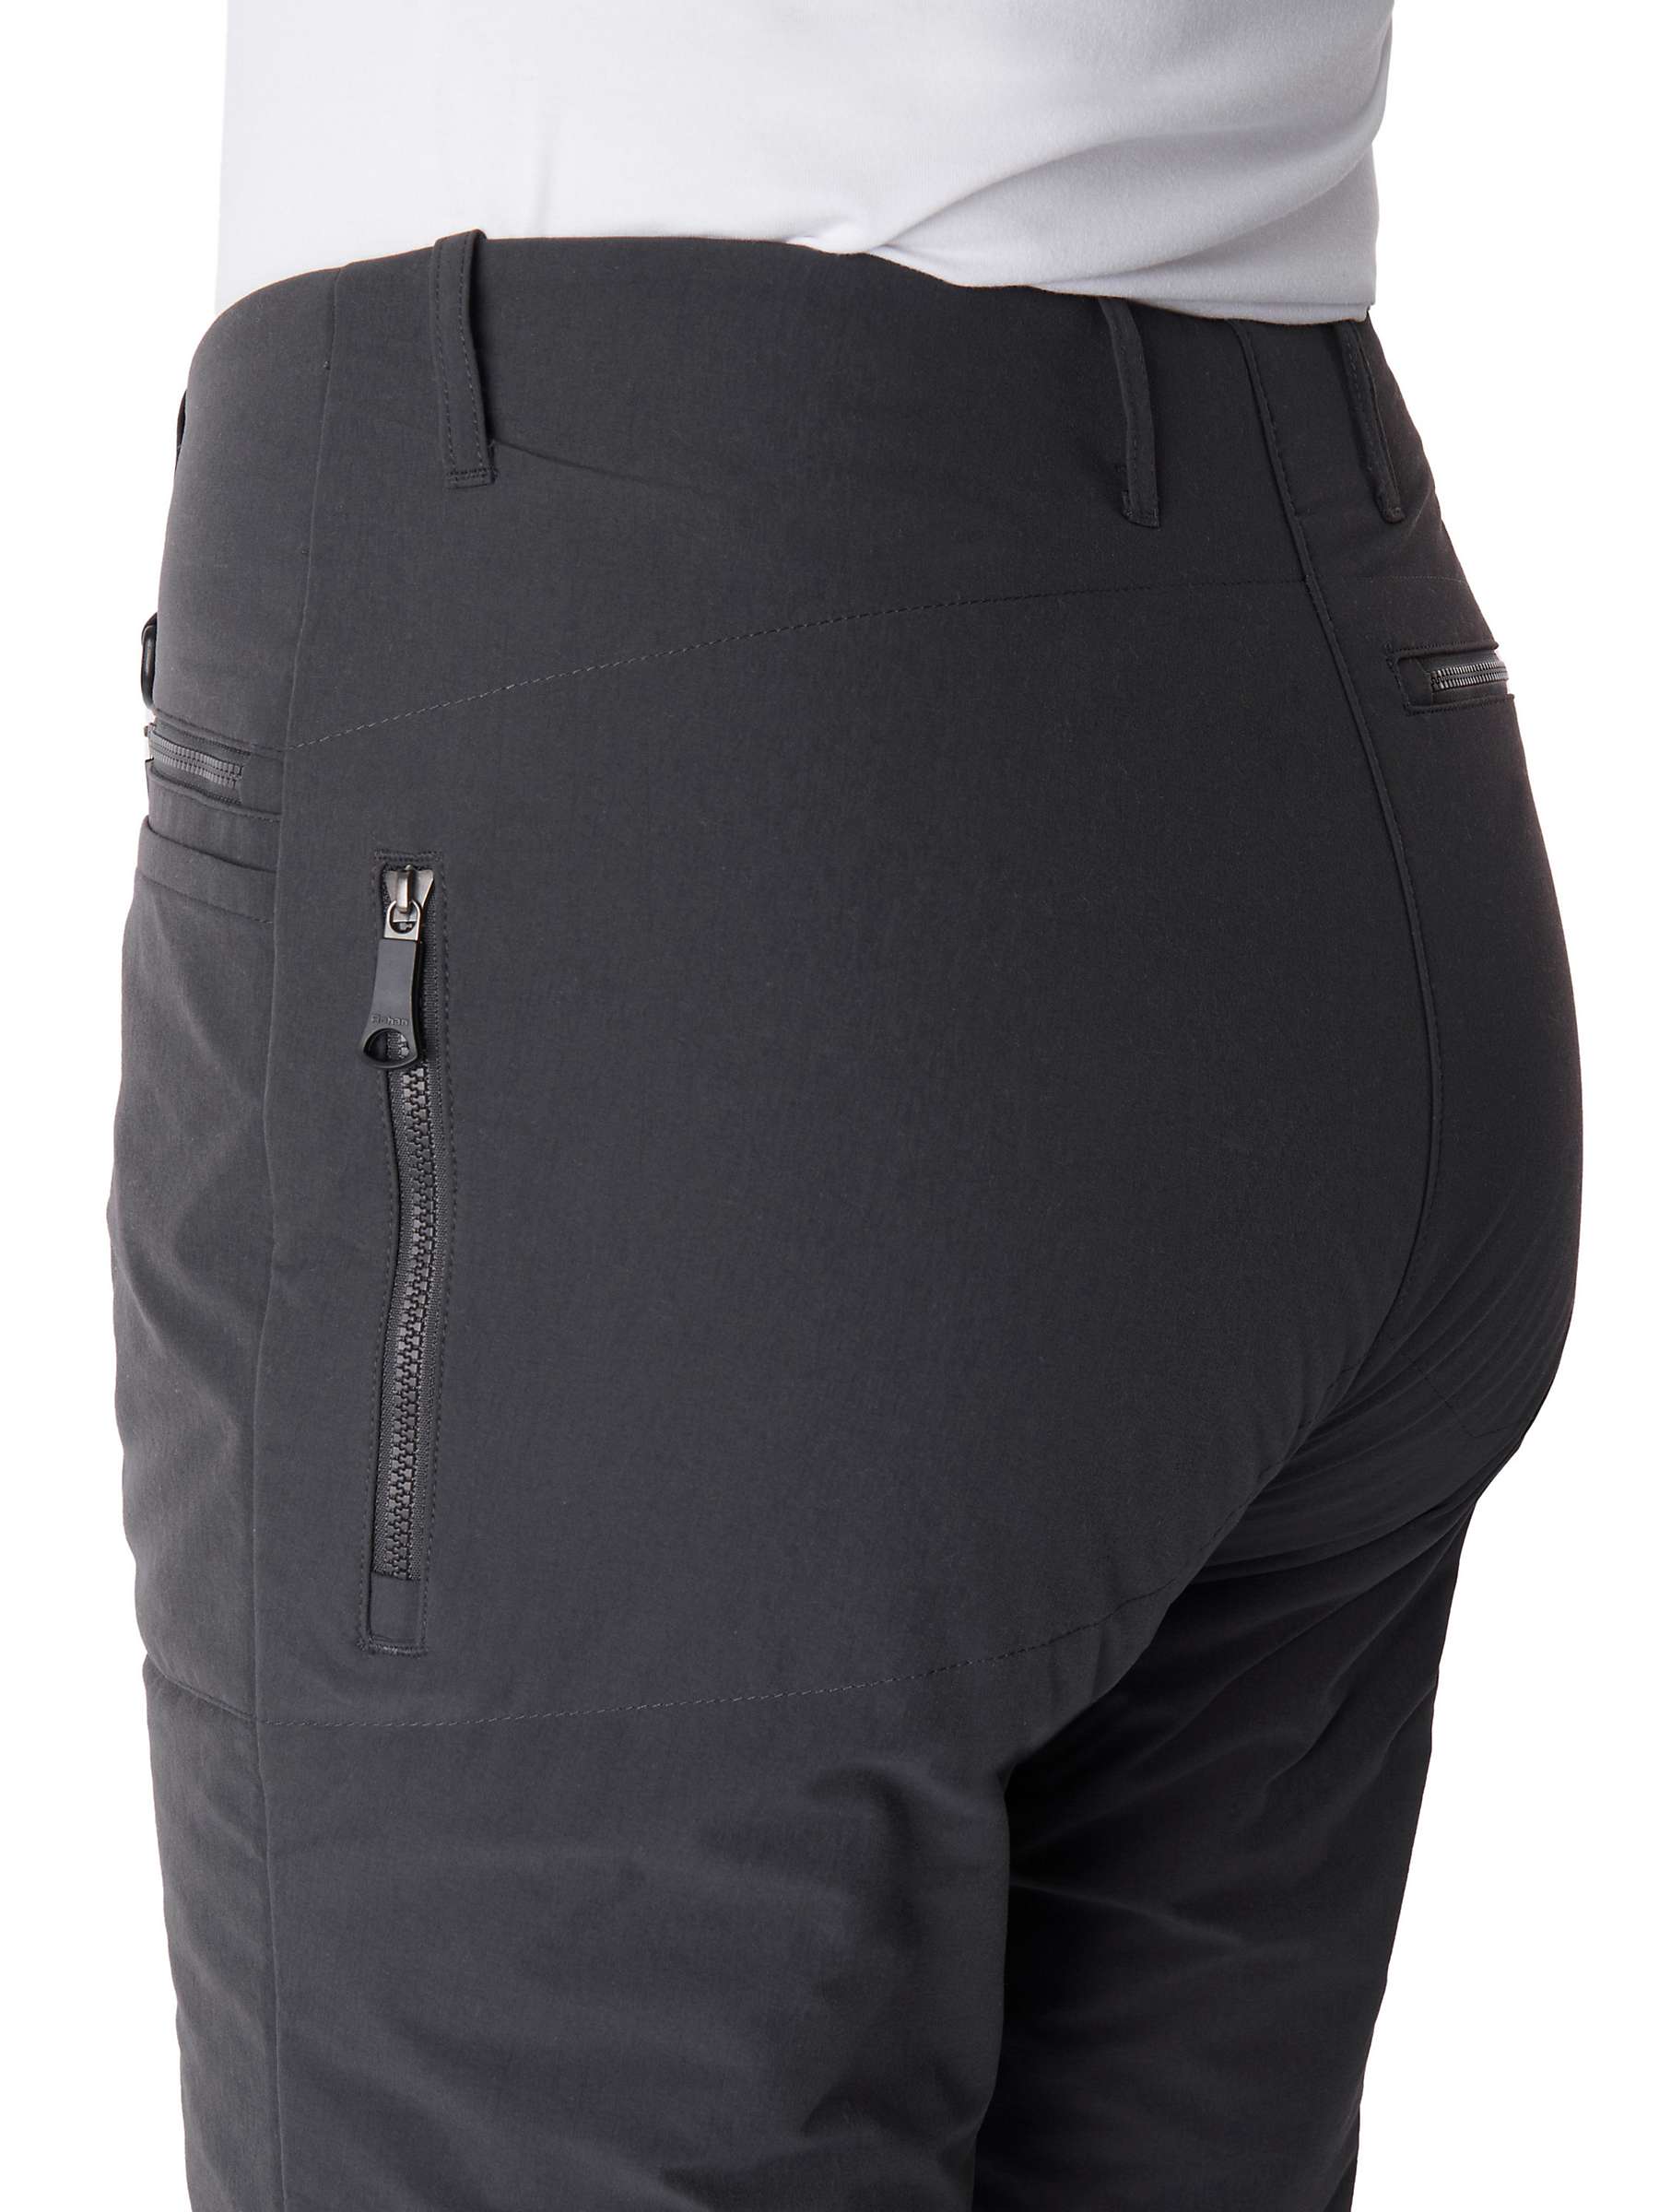 Buy Rohan Winter Stretch Bags Walking Trousers, Carbon Online at johnlewis.com